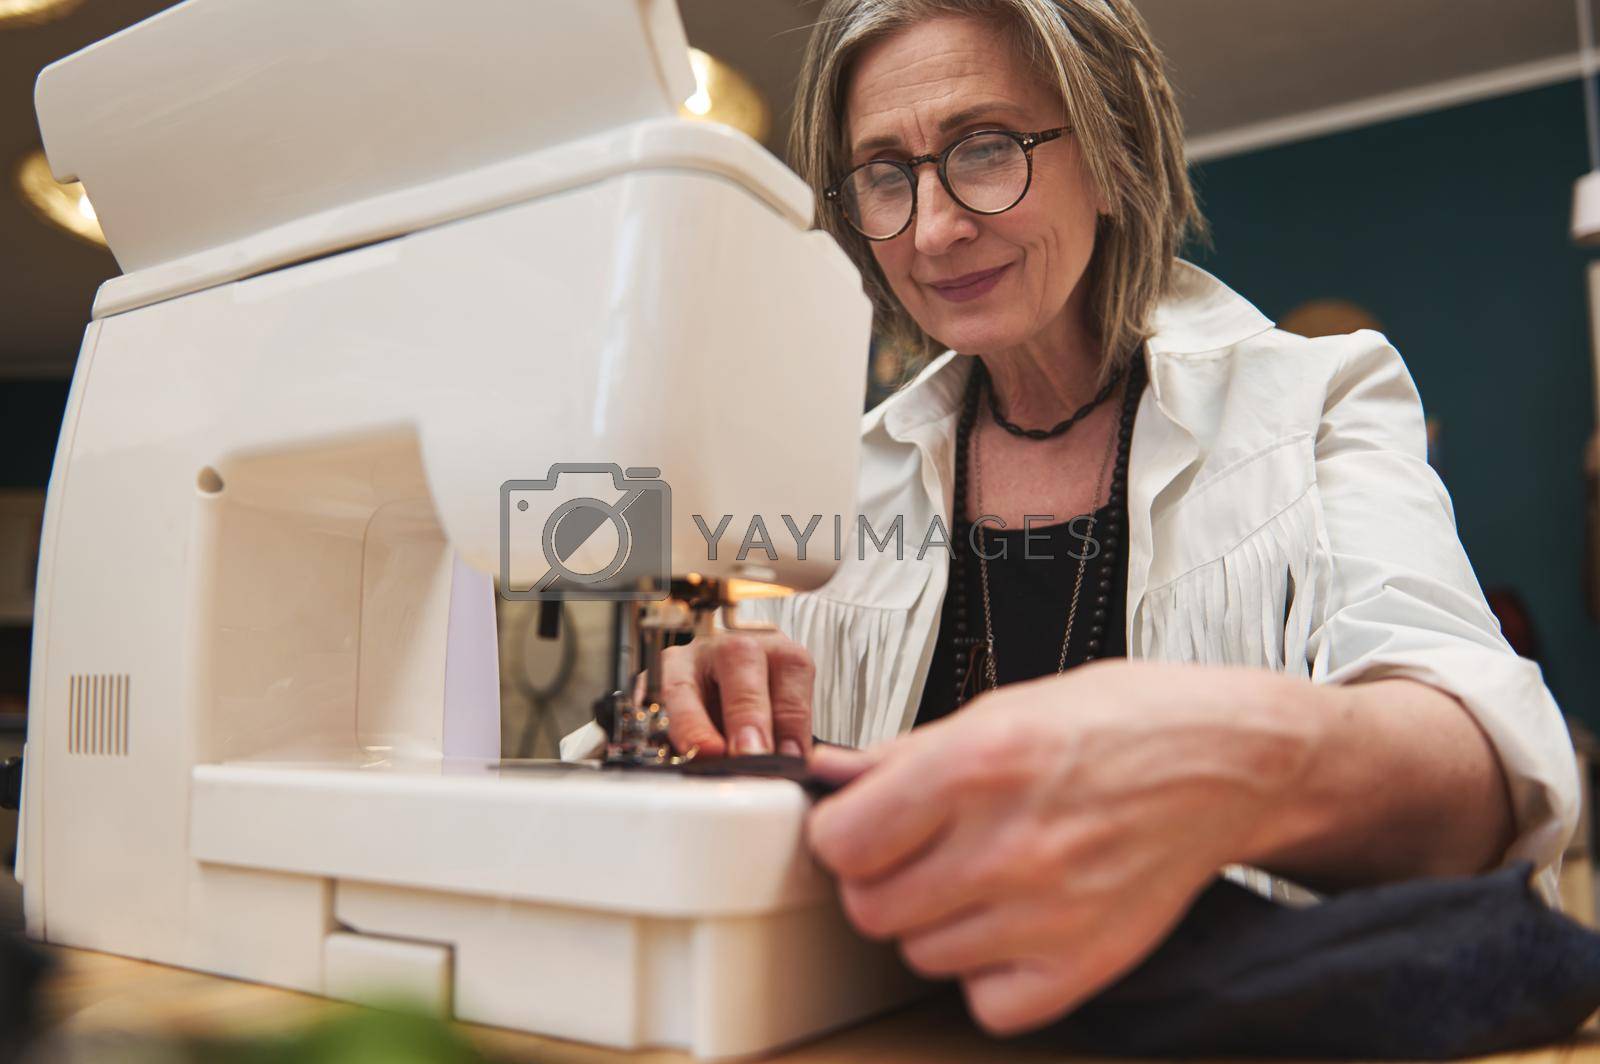 Royalty free image of A fashion designer tailor stitching black cloth on a manufacturing sewing machine in a tailoring atelier. Fashion design concept by artgf